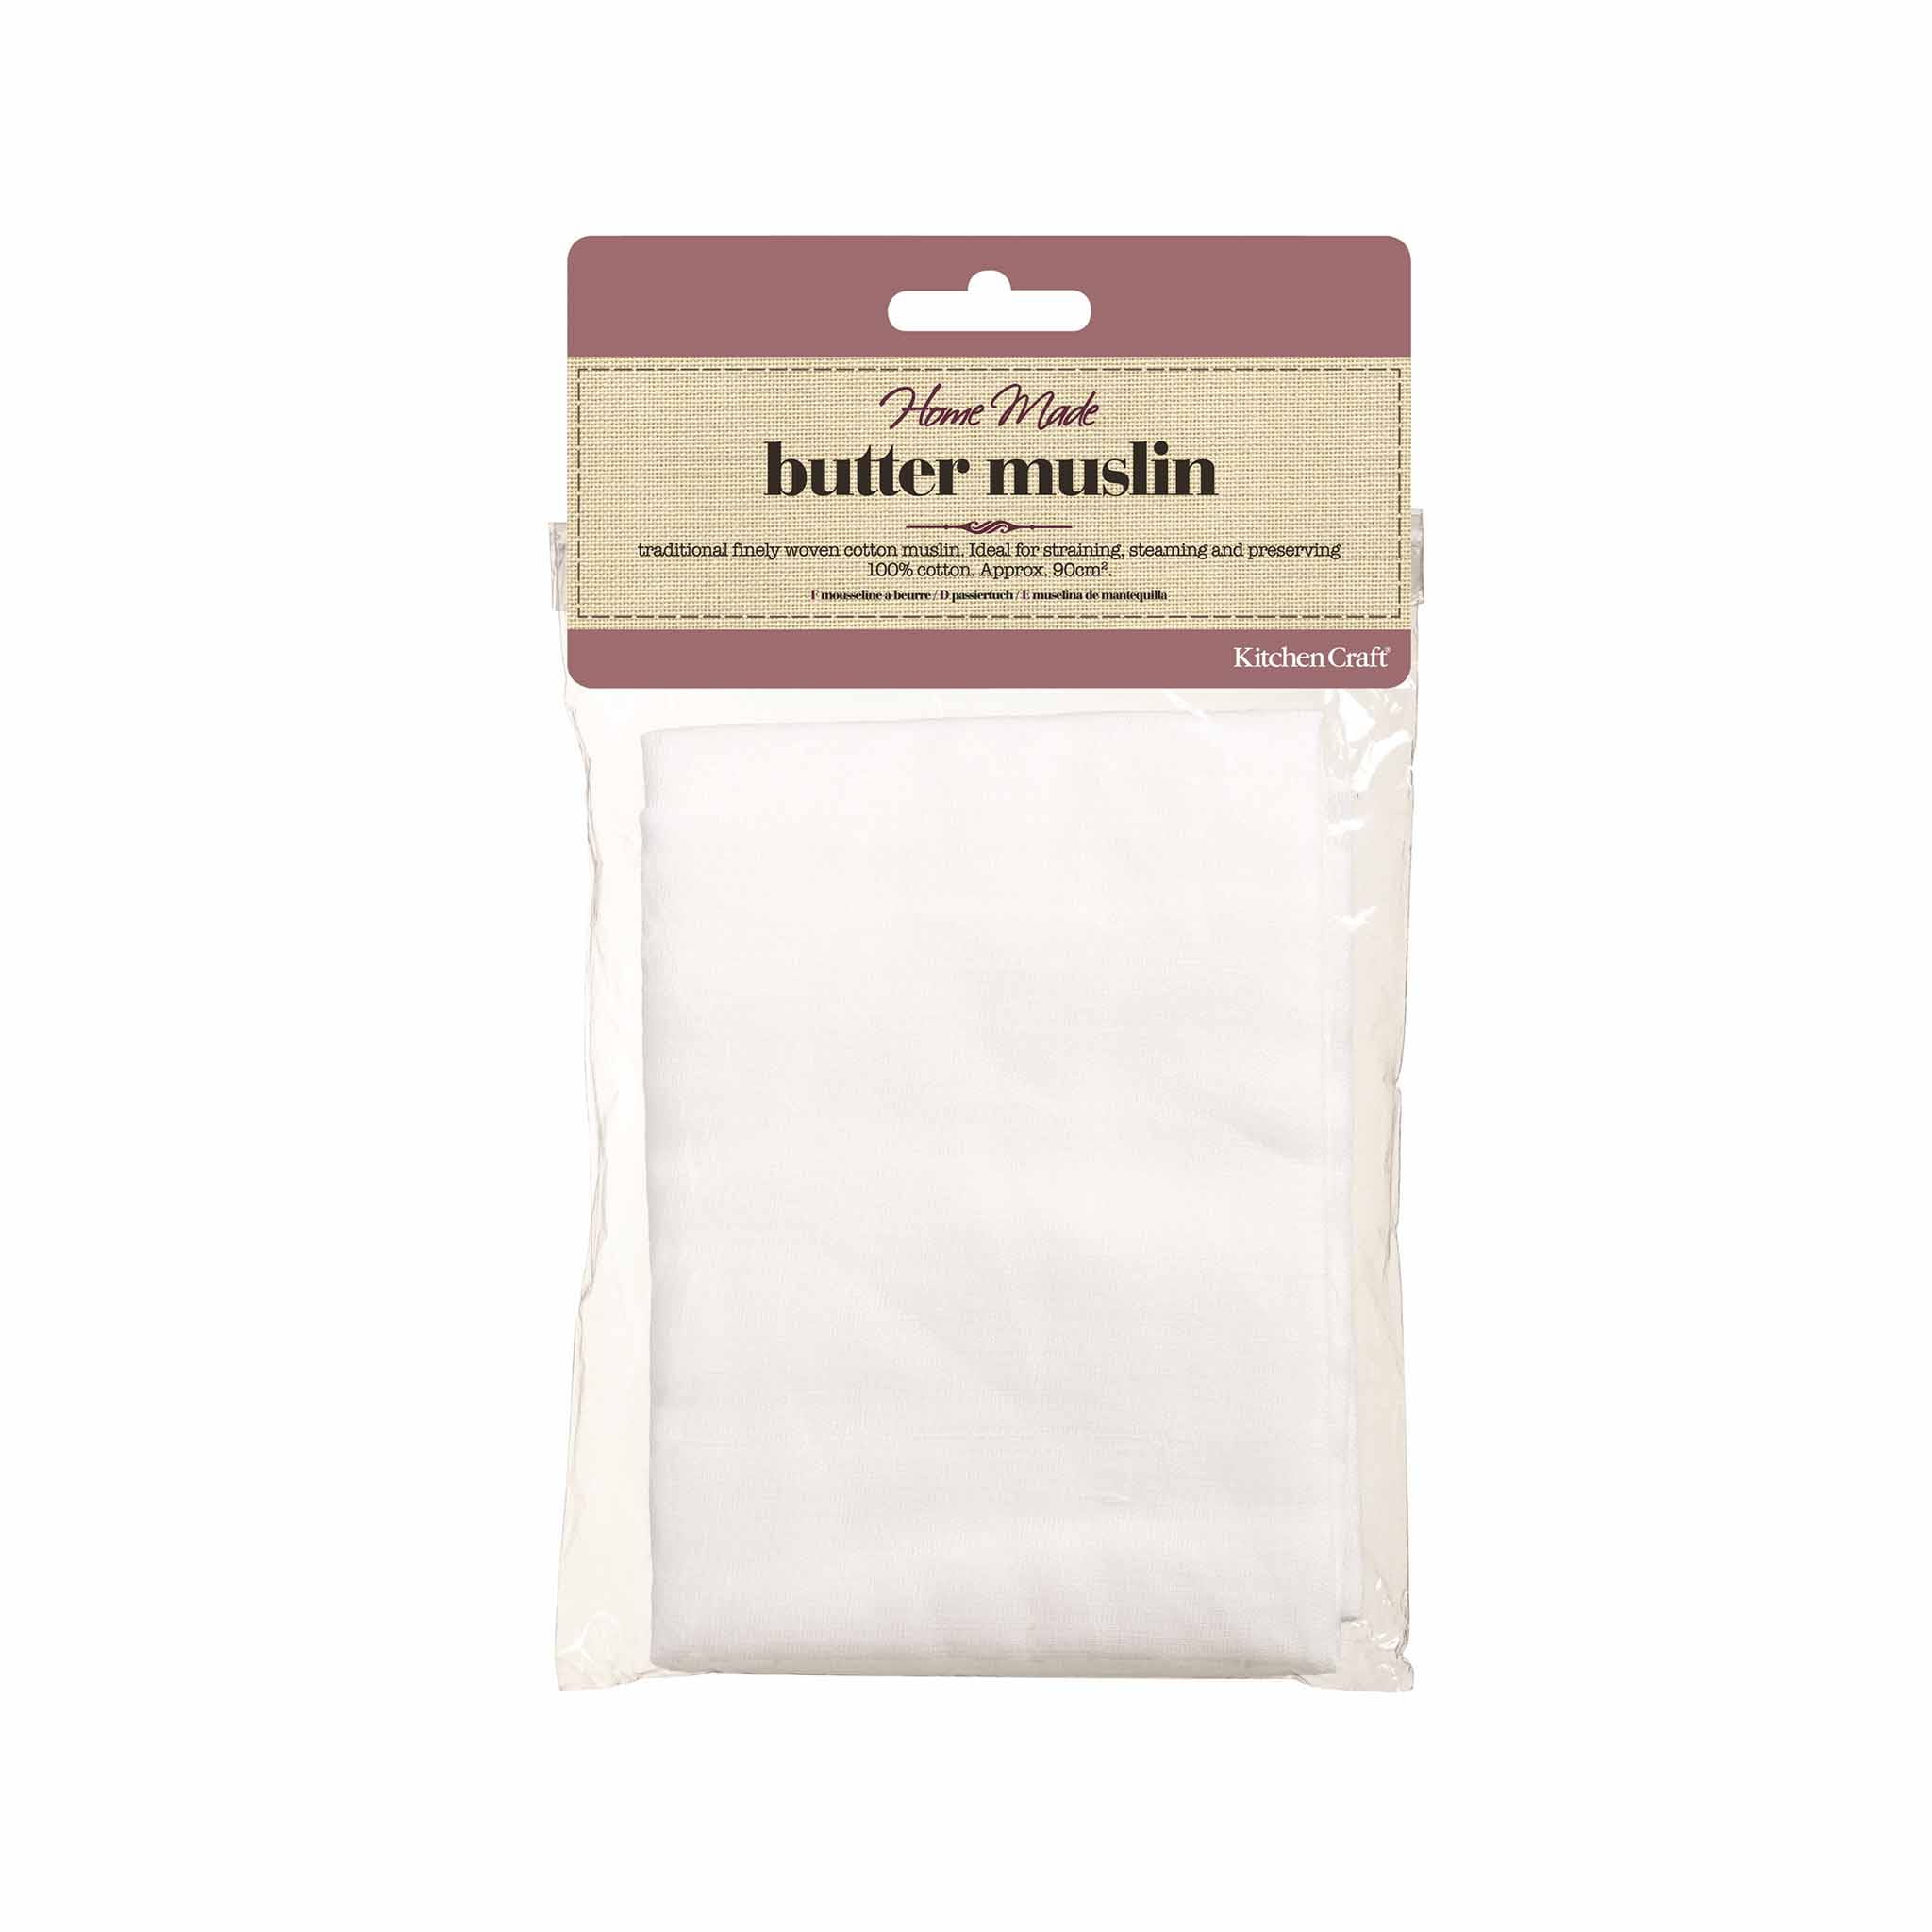 KitchenCraft Cook's Muslin Square 90cm